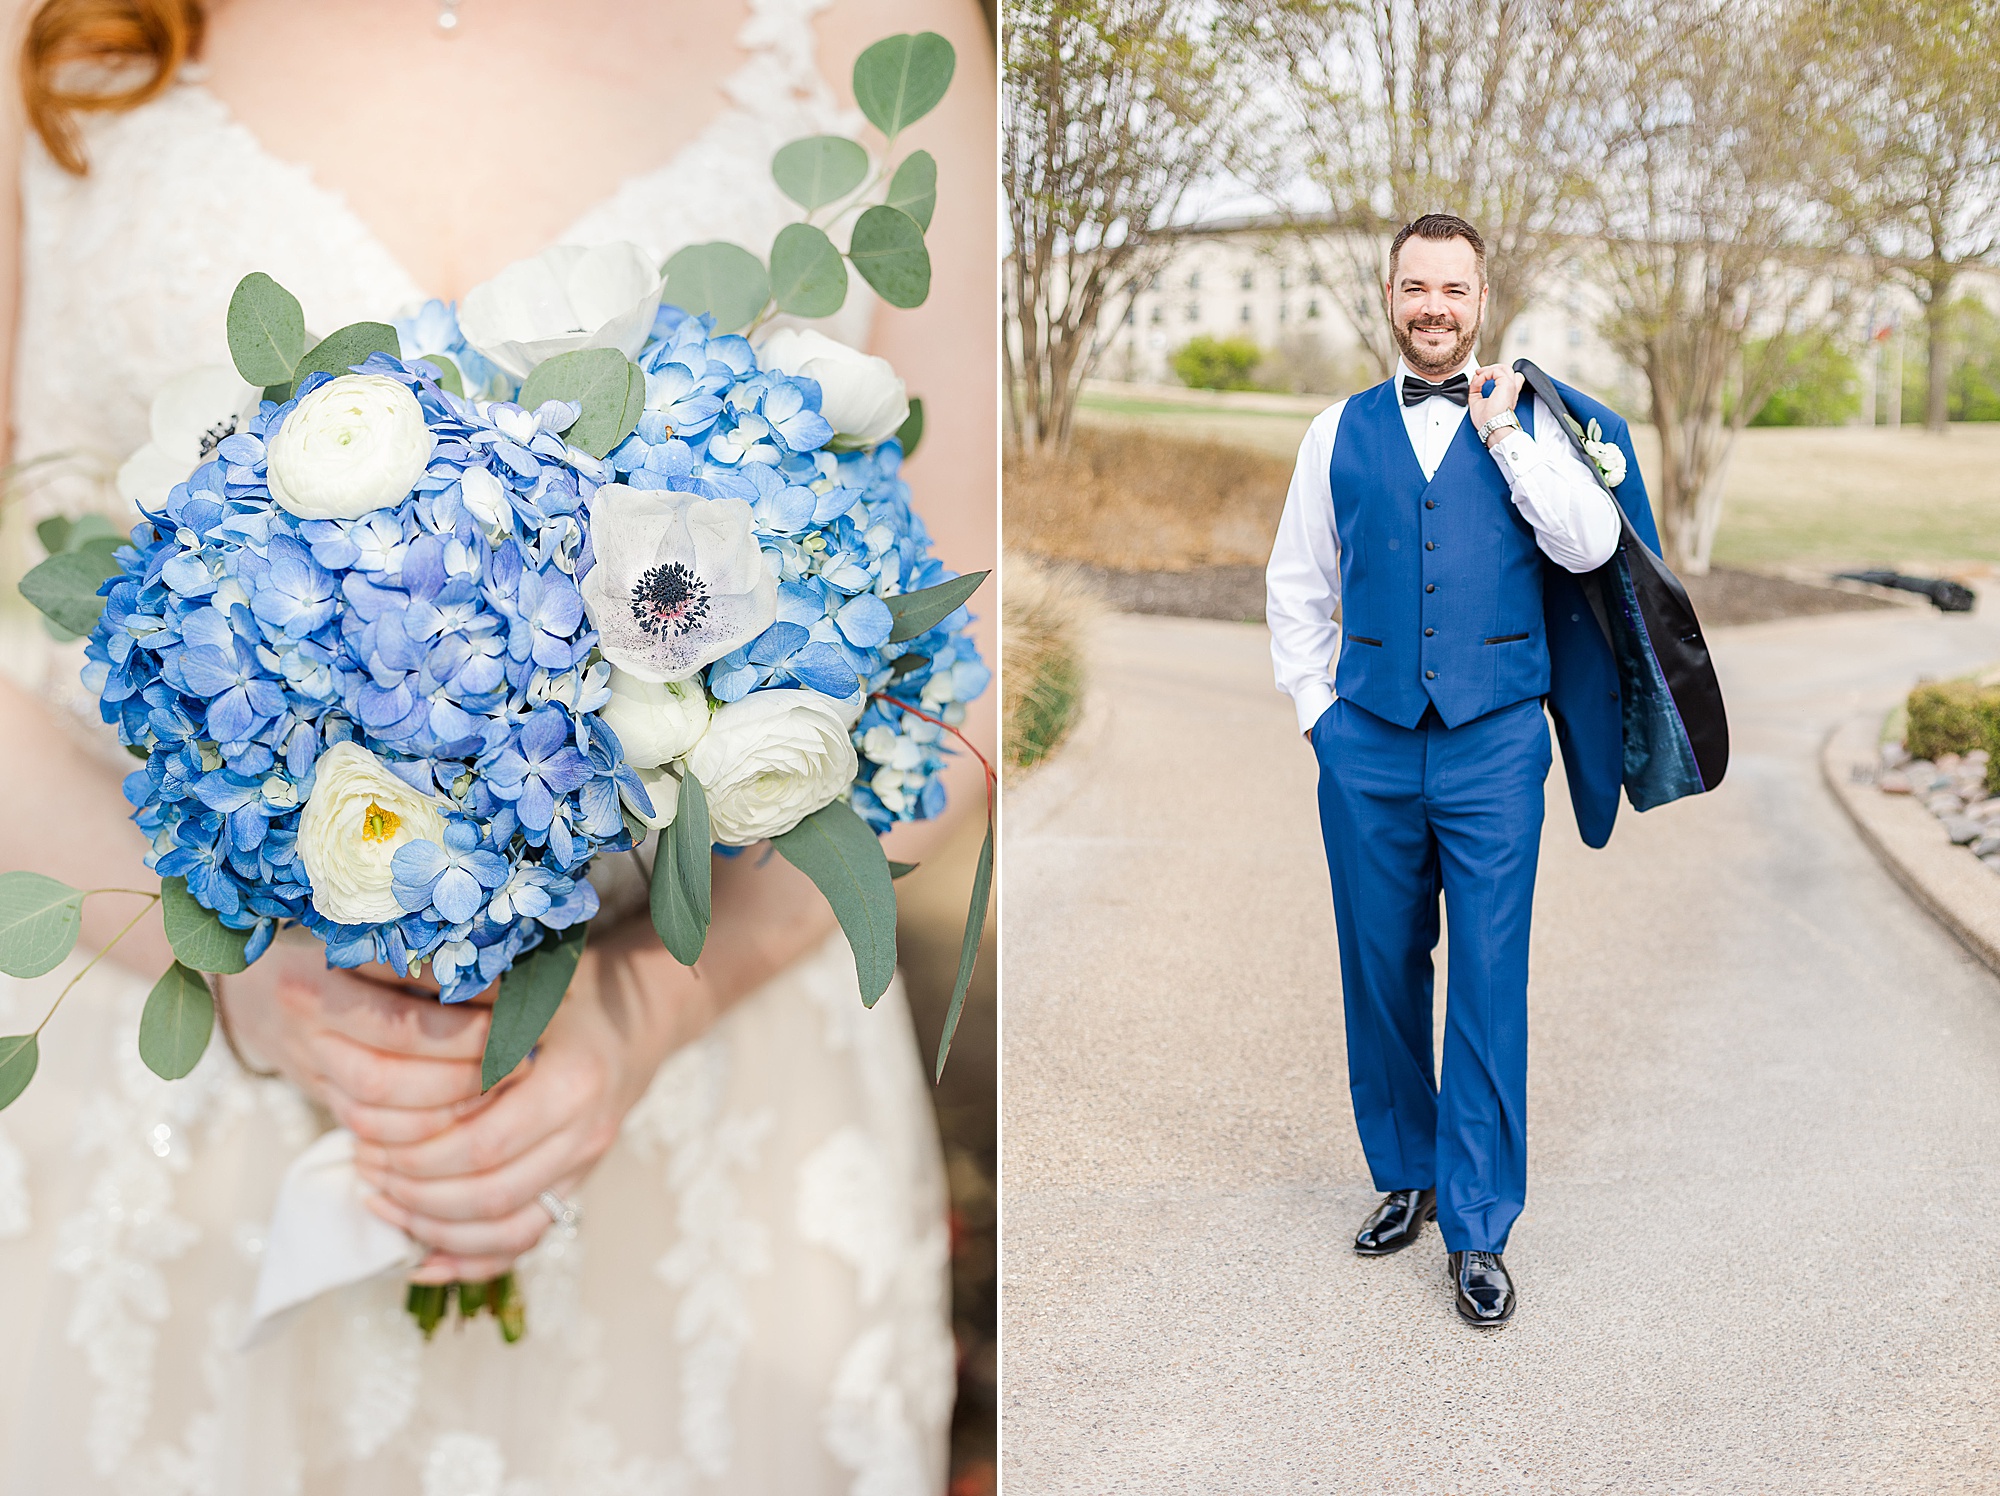 groom walks withe blue suit while bride holds bouquet of blue flowers